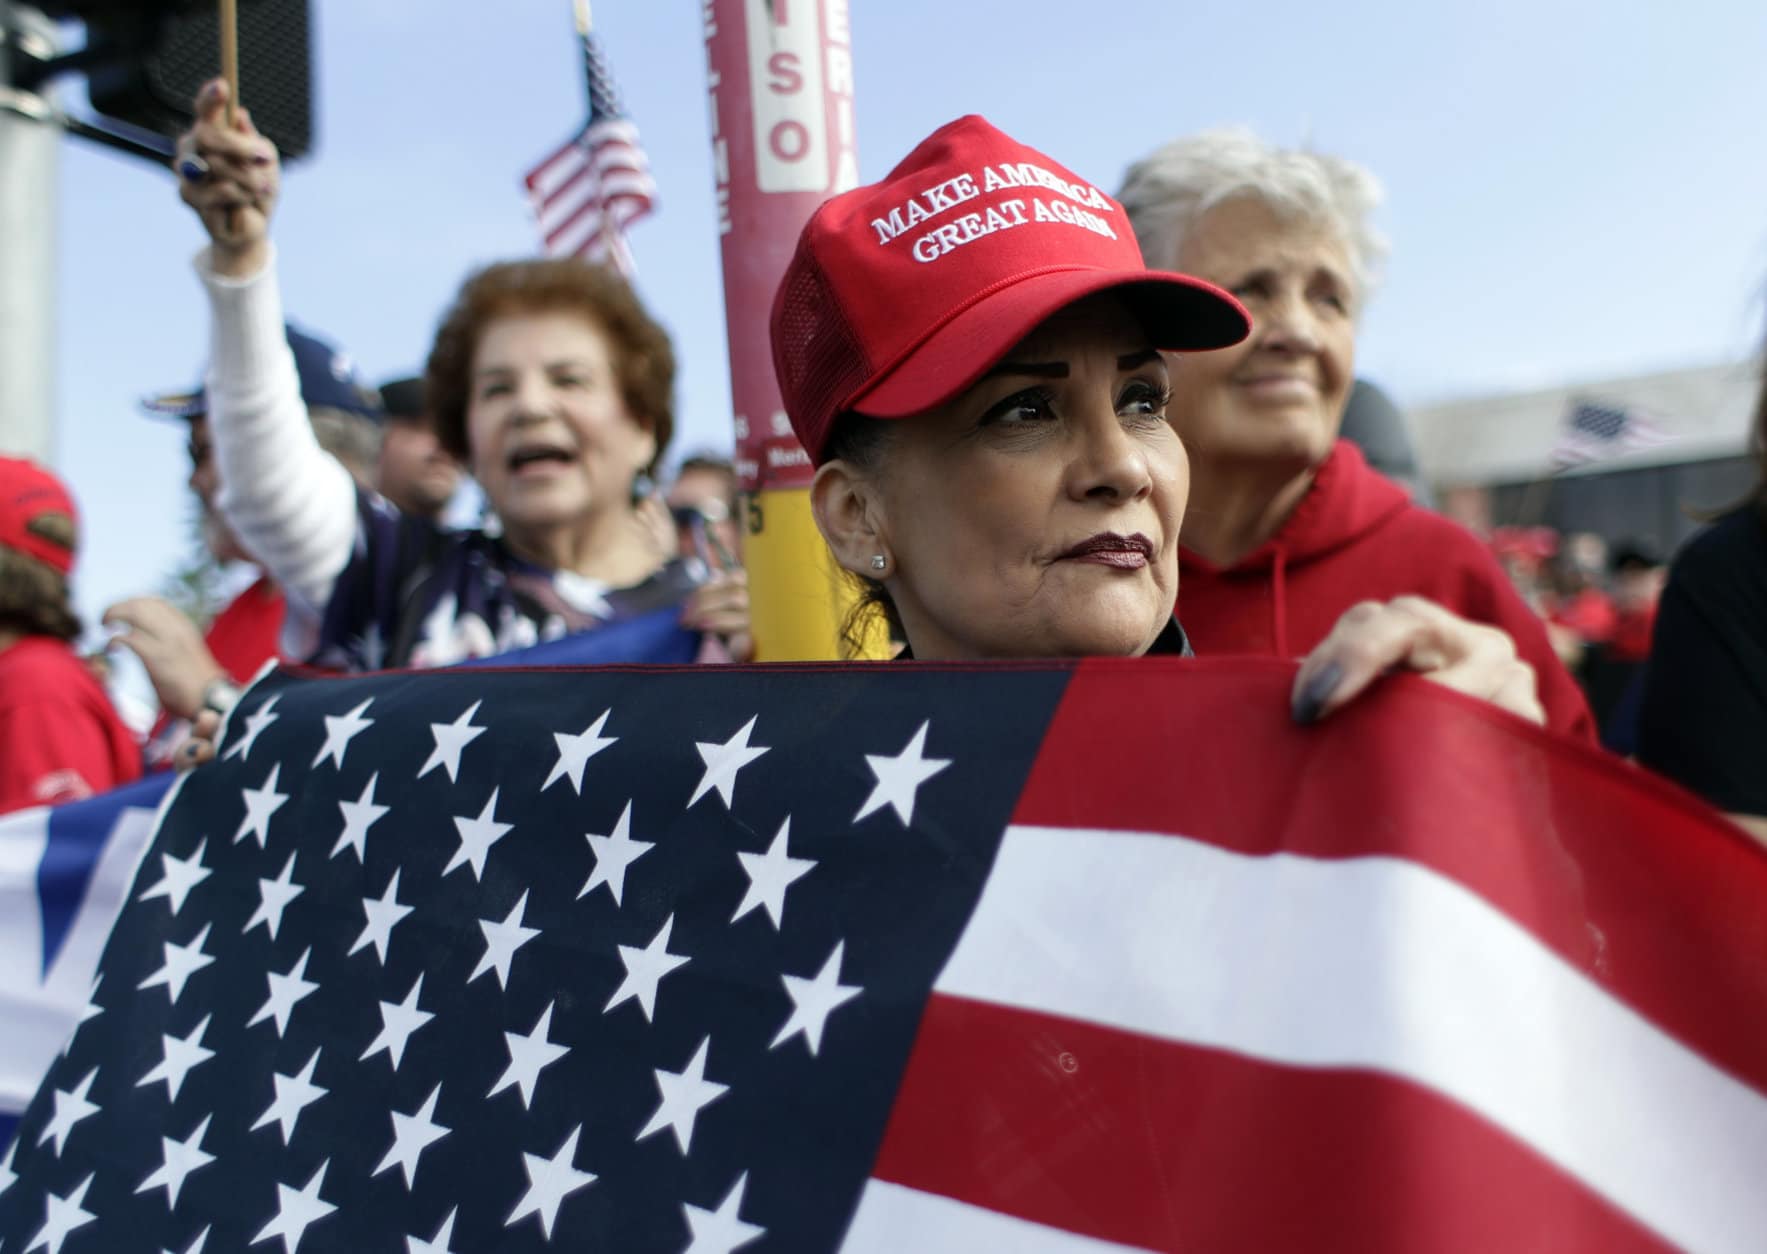 Supporters of President Donald Trump wait outside the McAllen International Airport for Trump's visit to the southern border, Thursday, Jan. 10, 2019, in McAllen, Texas. (AP Photo/Eric Gay)